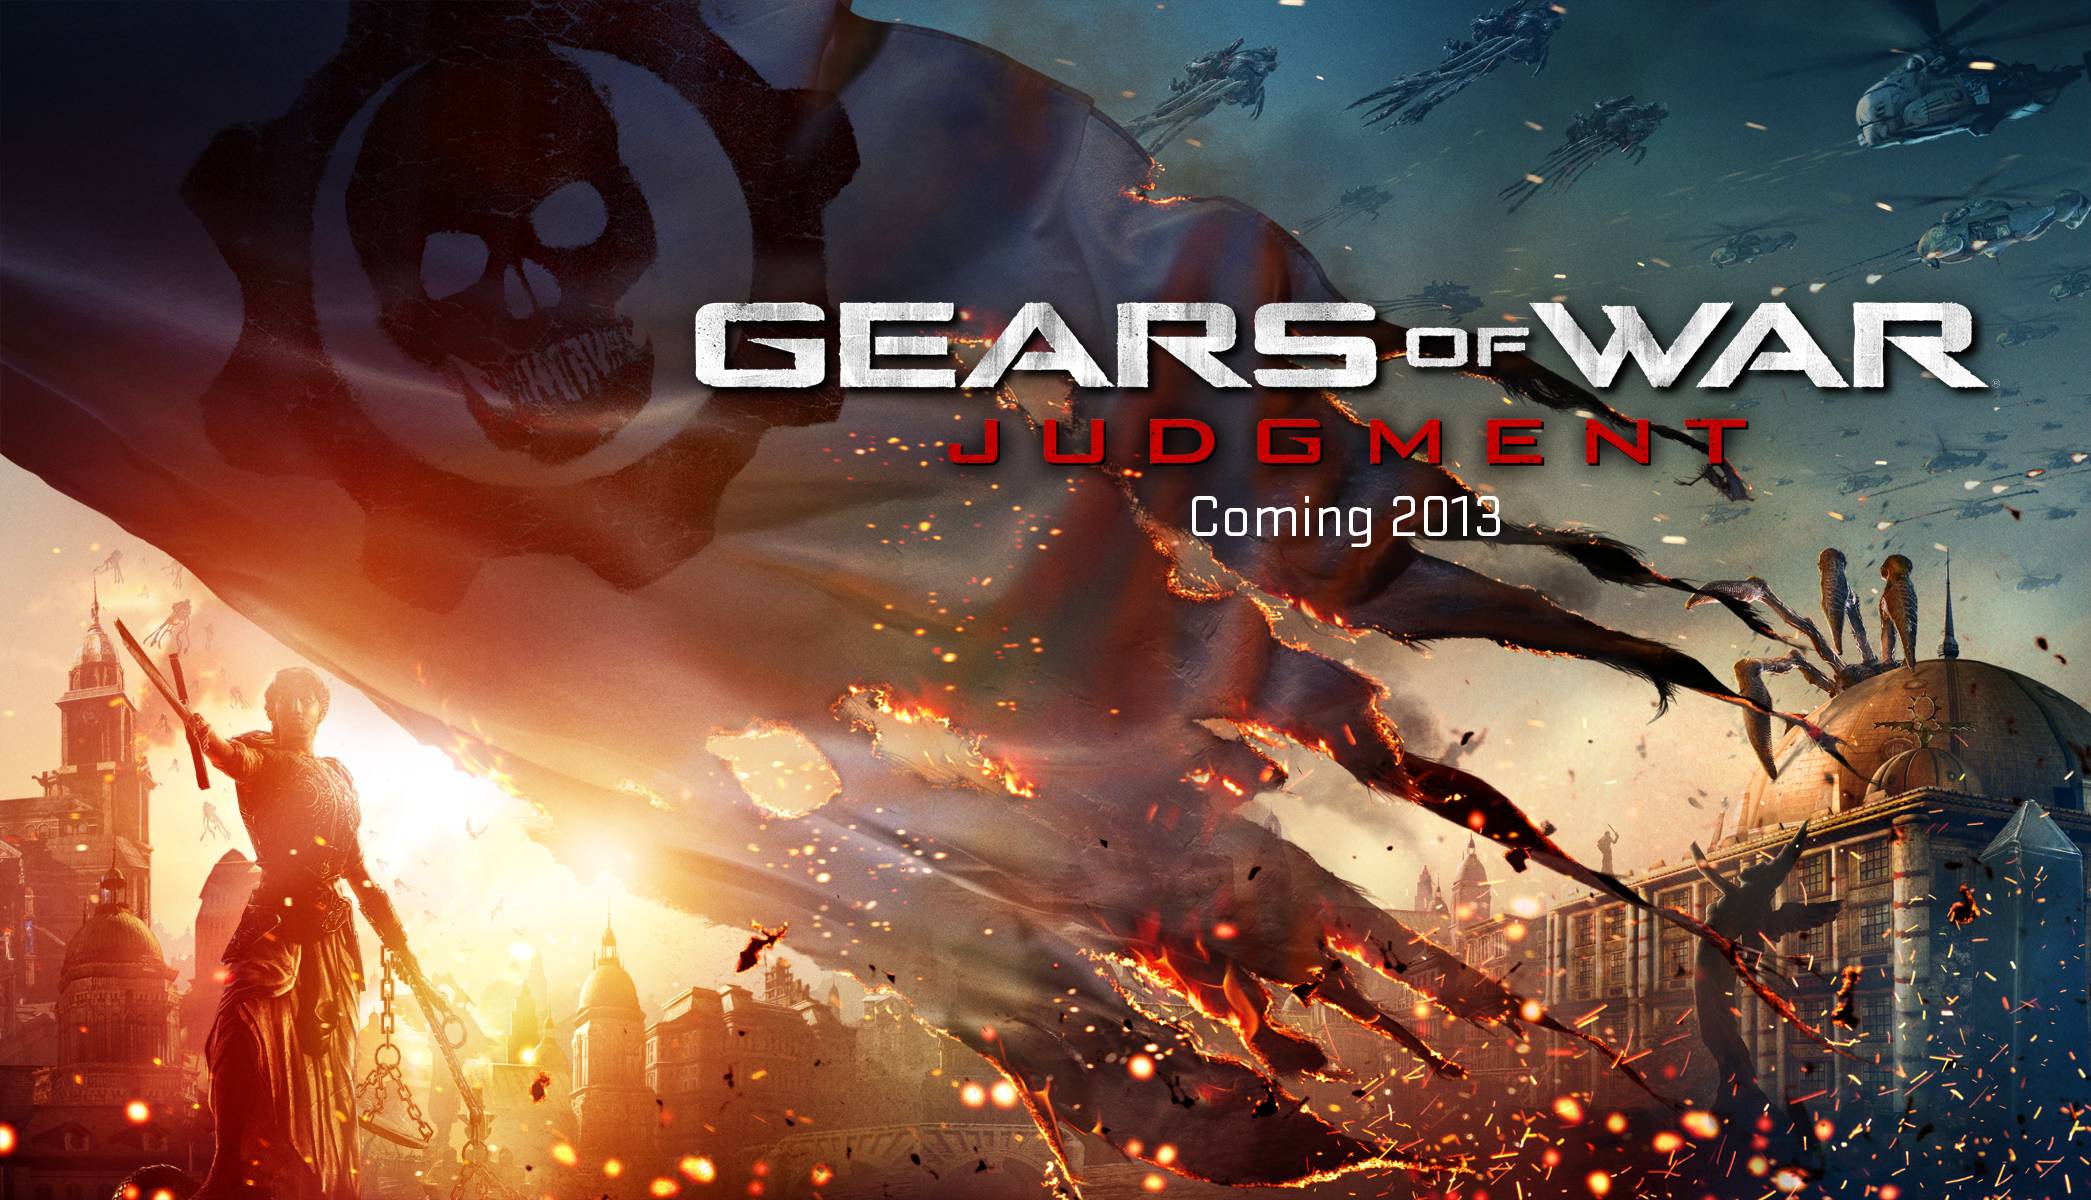 Get Your Gears of War: Judgment Wallpaper Here!. Epic Games Community